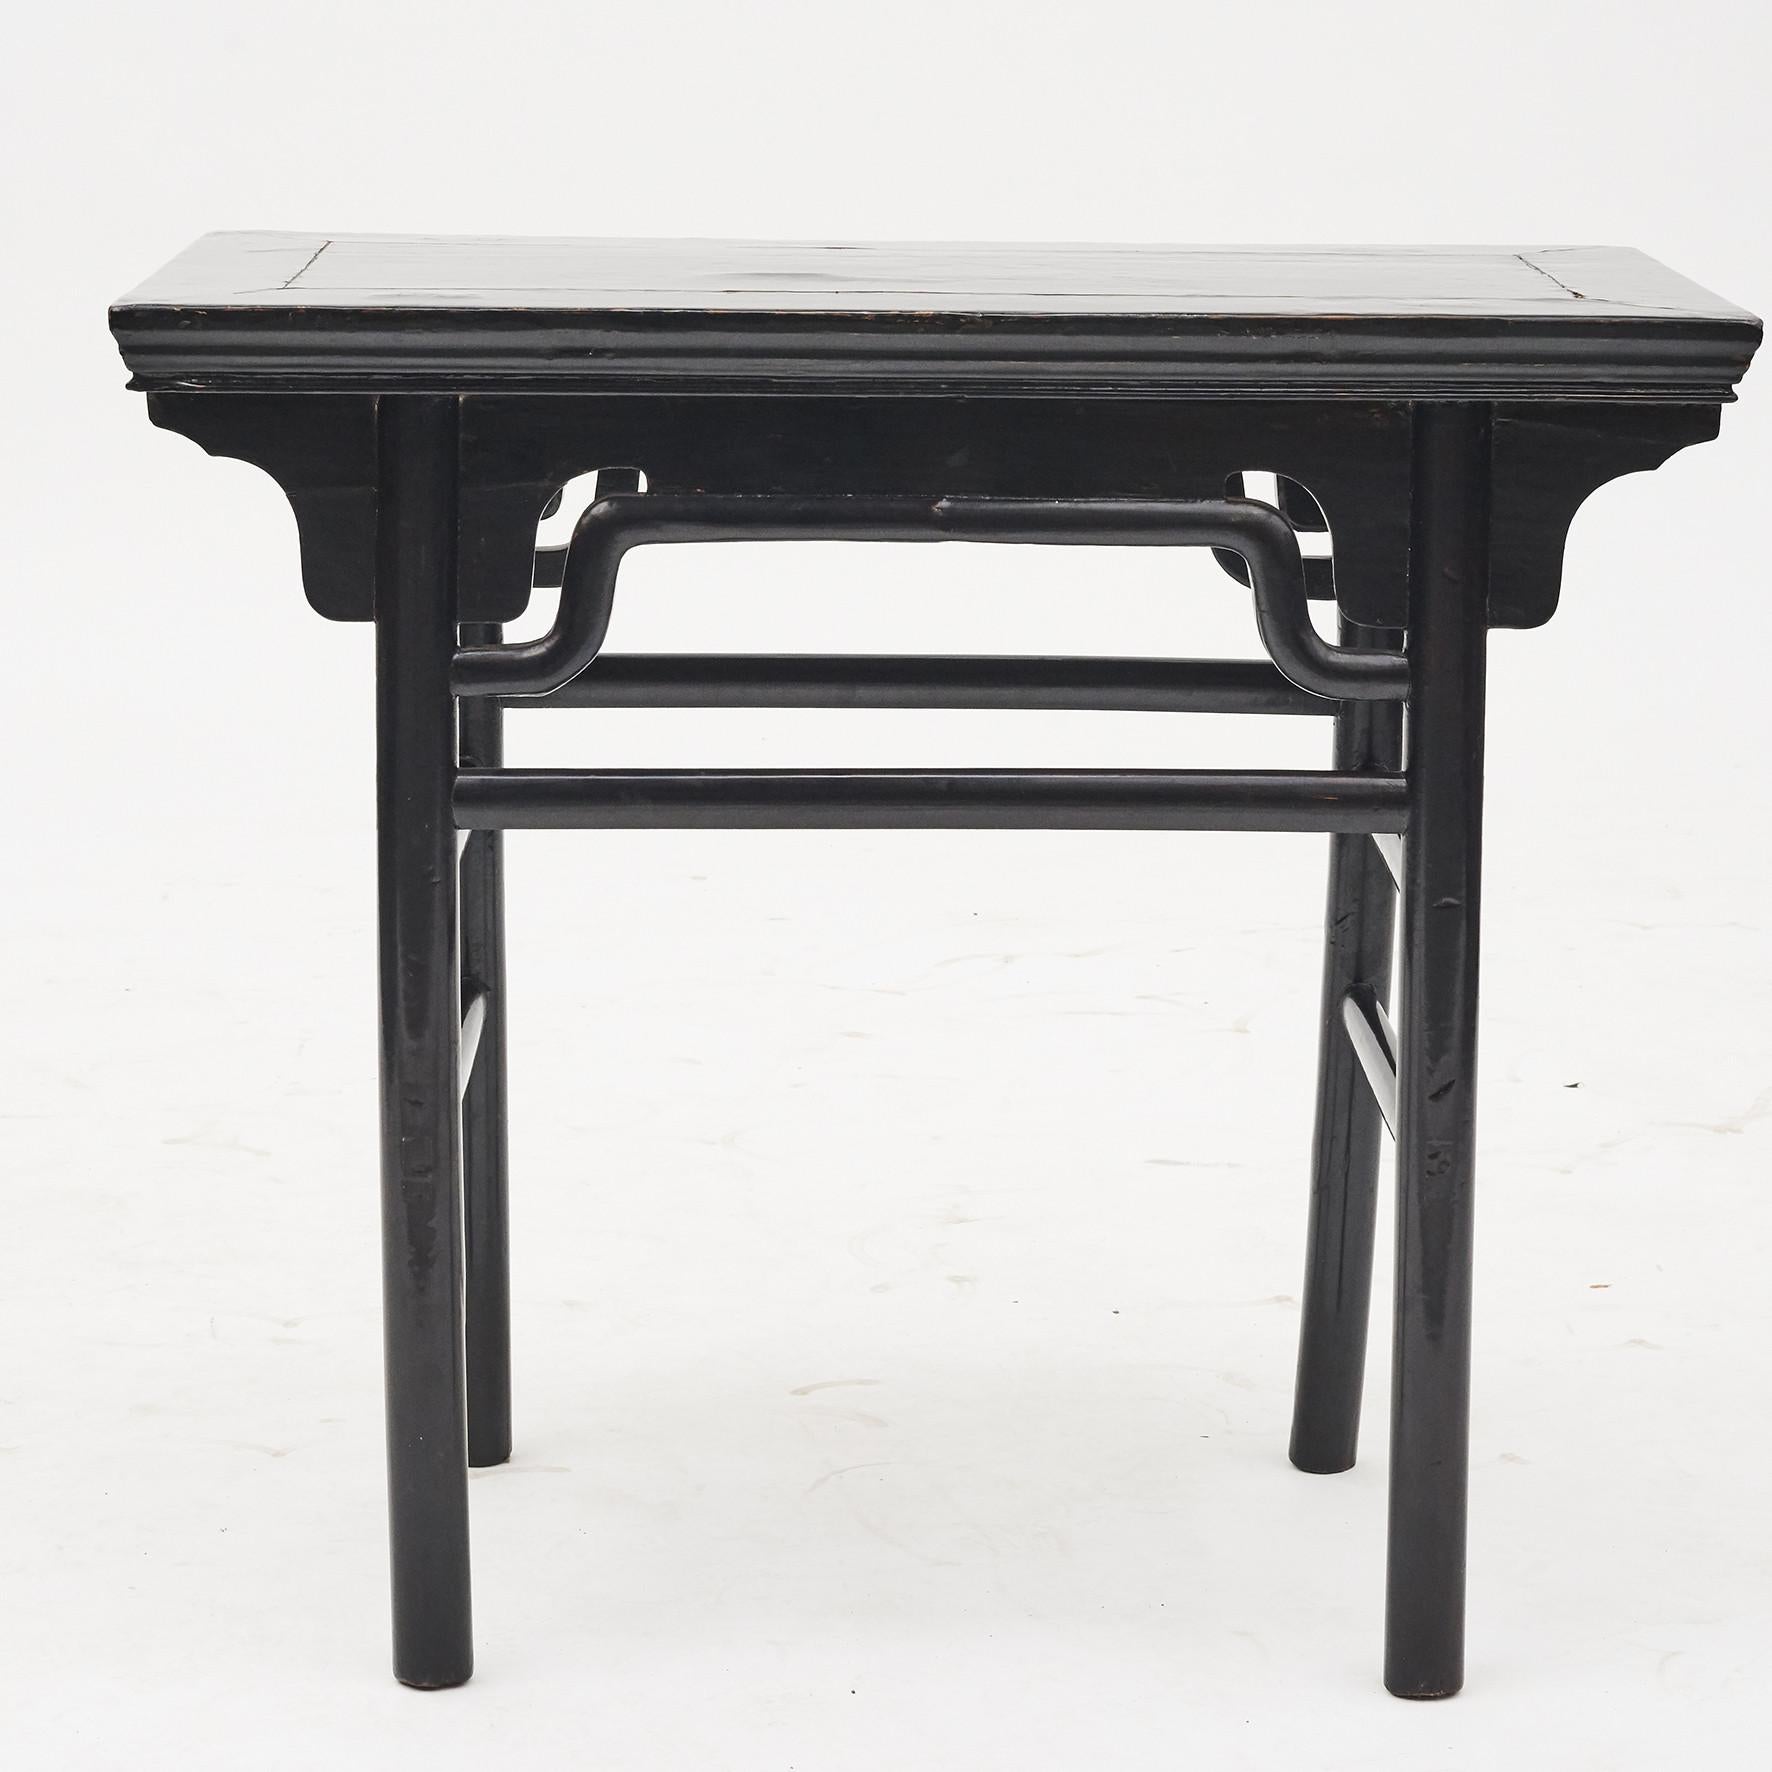 Black Ming style lacquer console table from Jiangsu provins, China, circa 1840.
Freestanding.